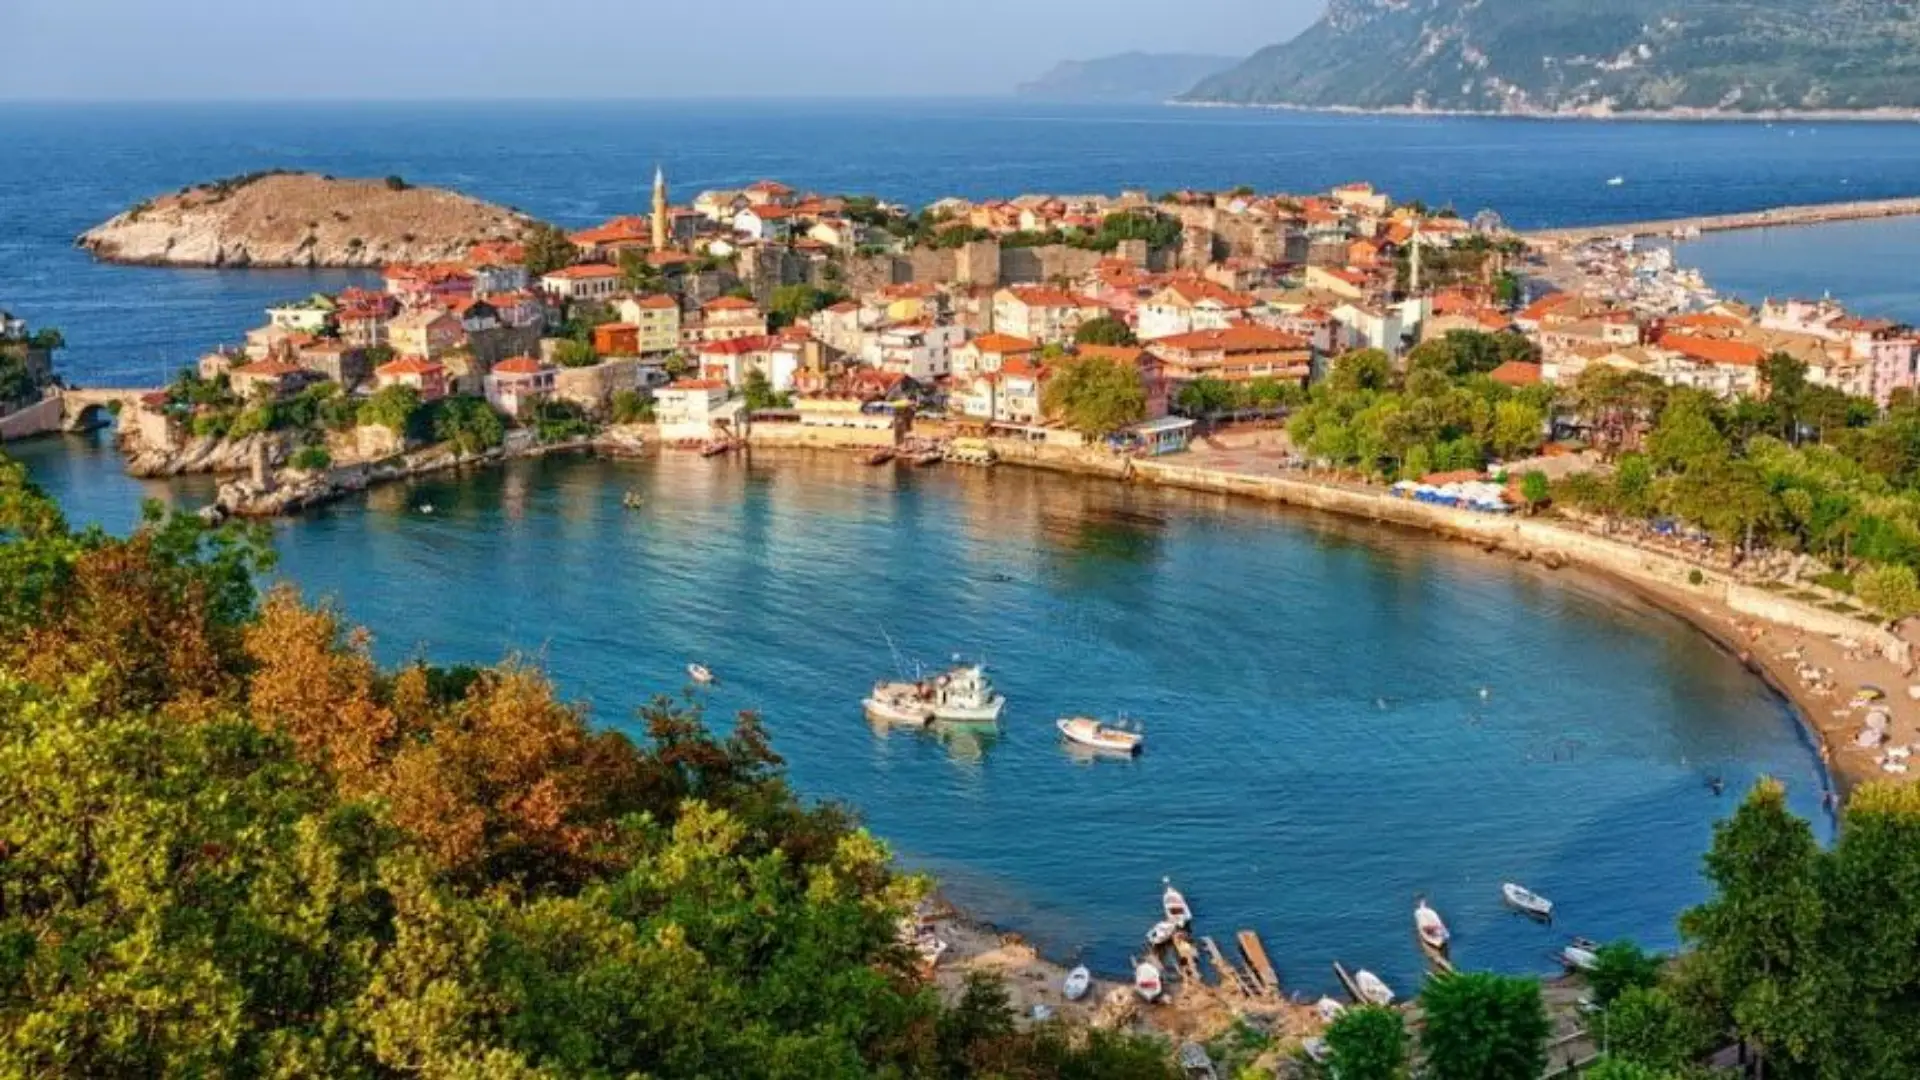 Bartın - Amasra Guide for the Weekend